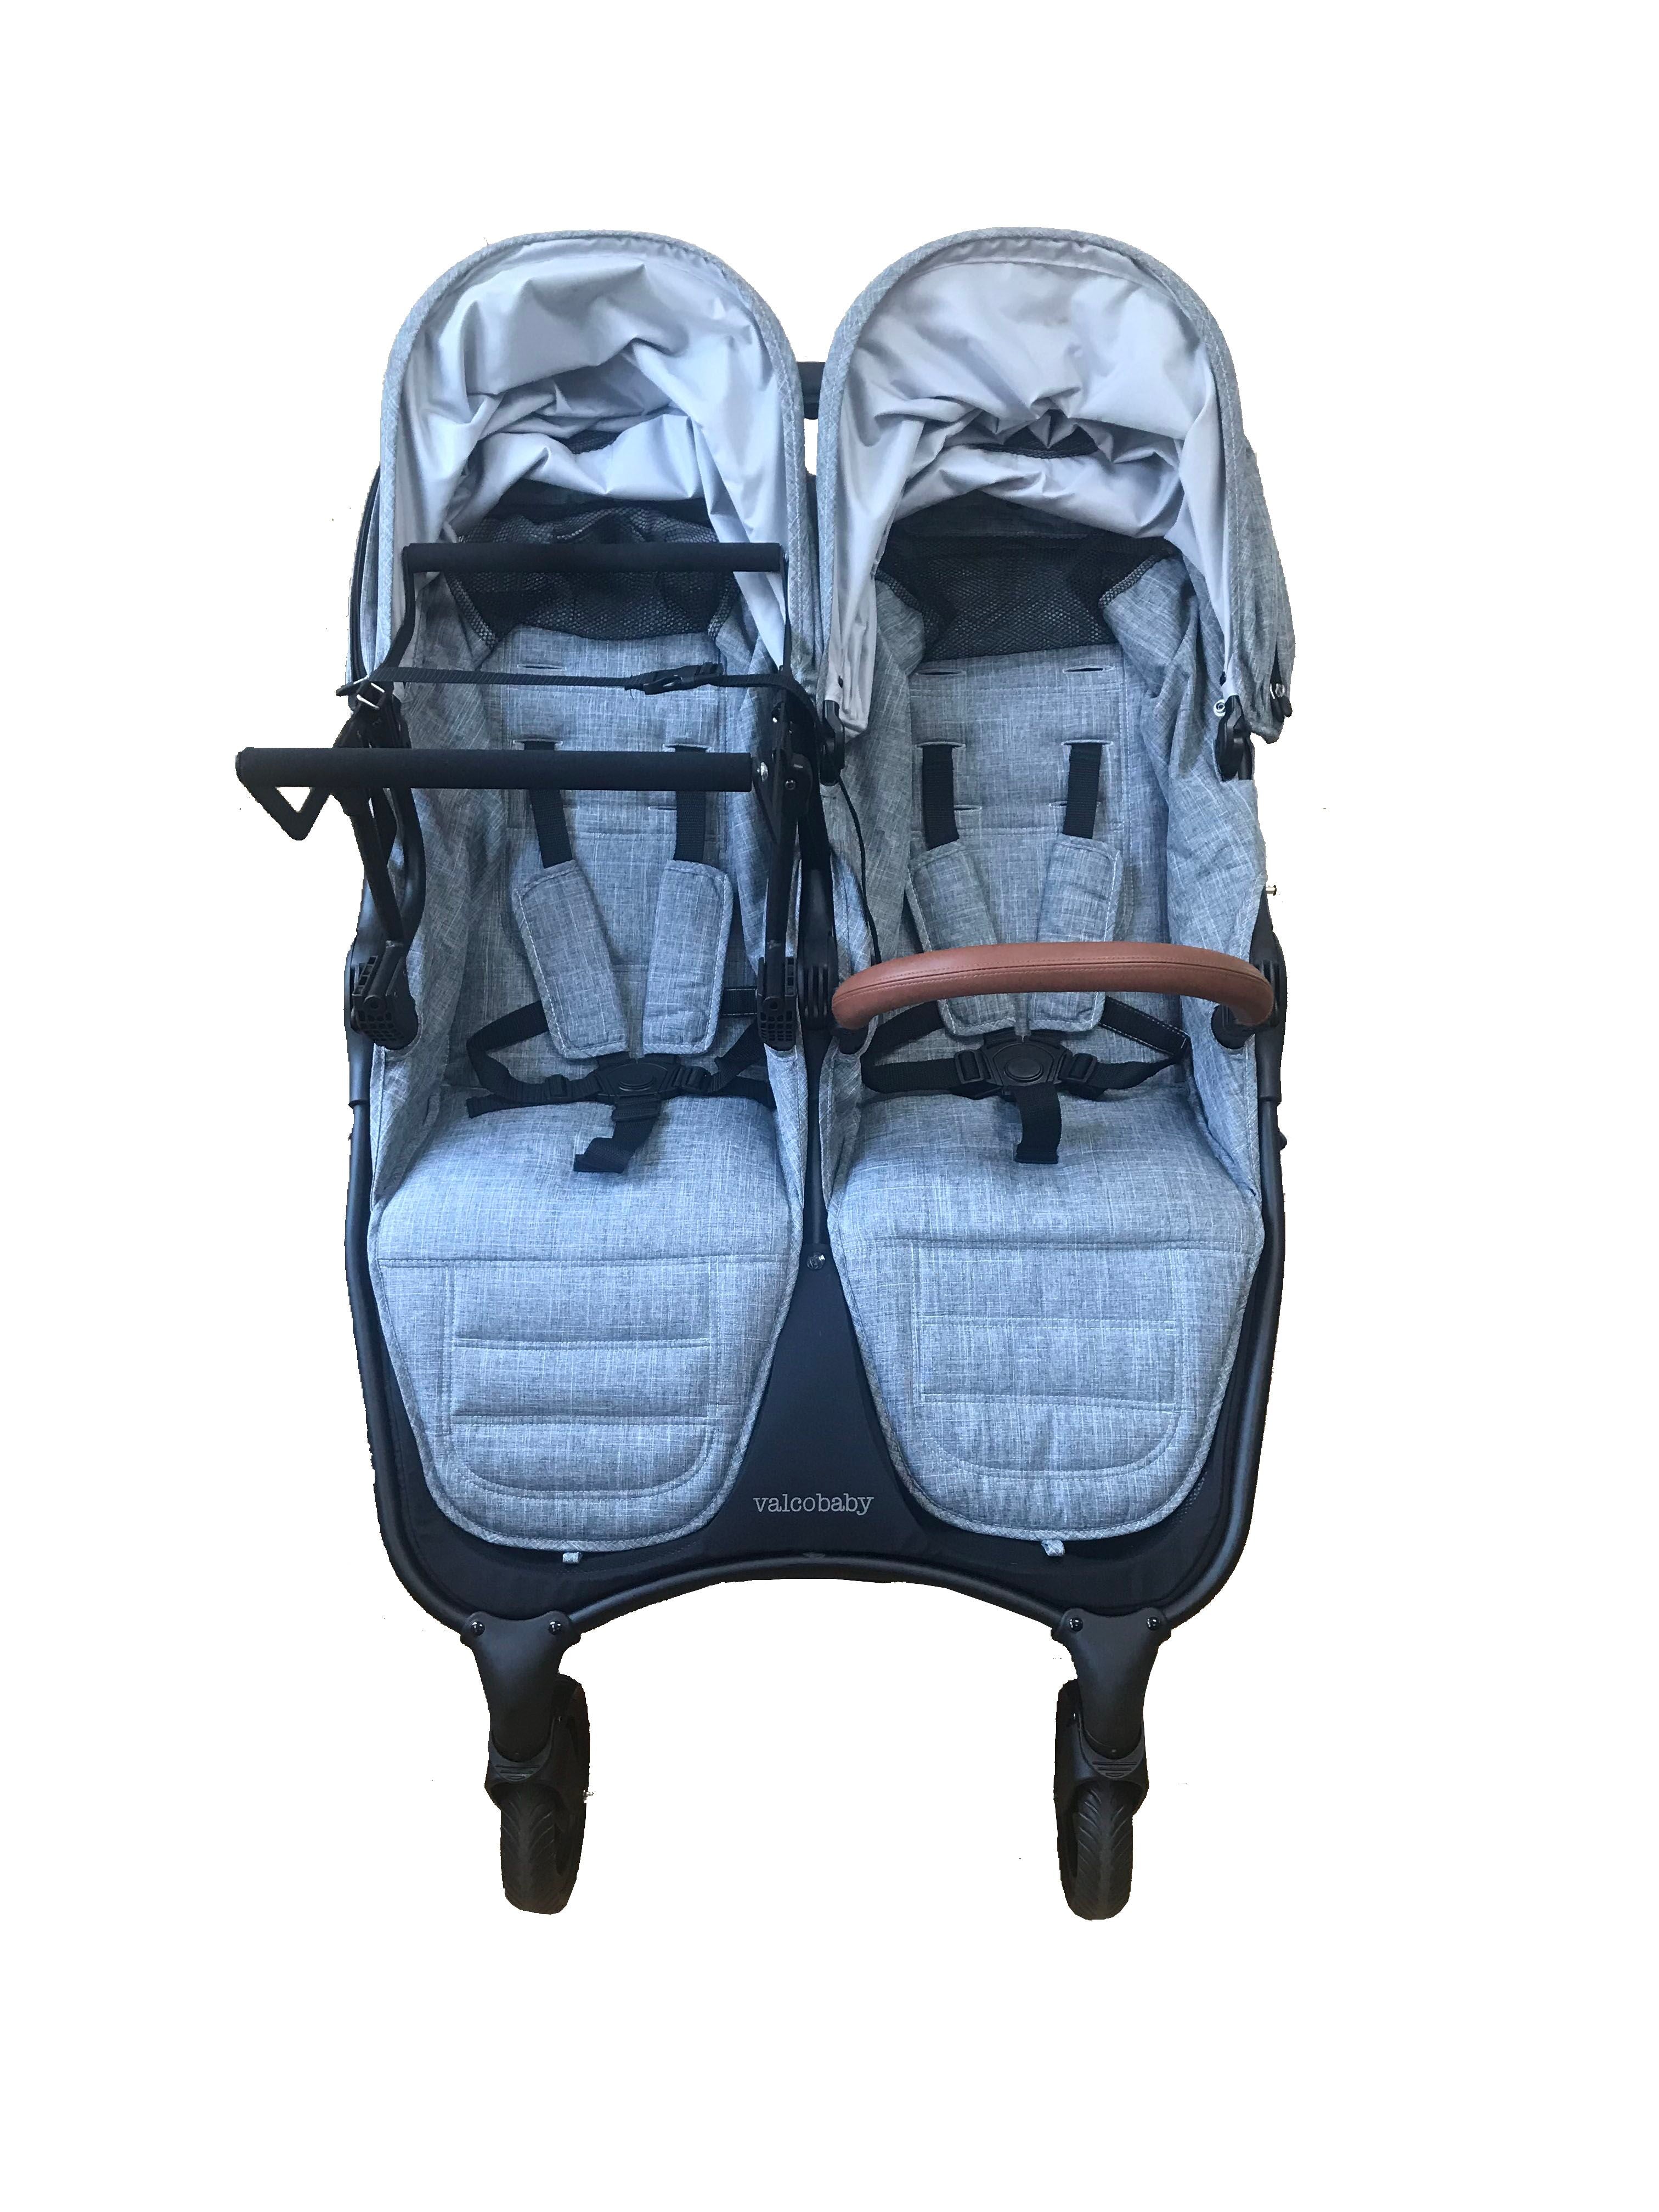 valco baby snap duo trend car seat adapter